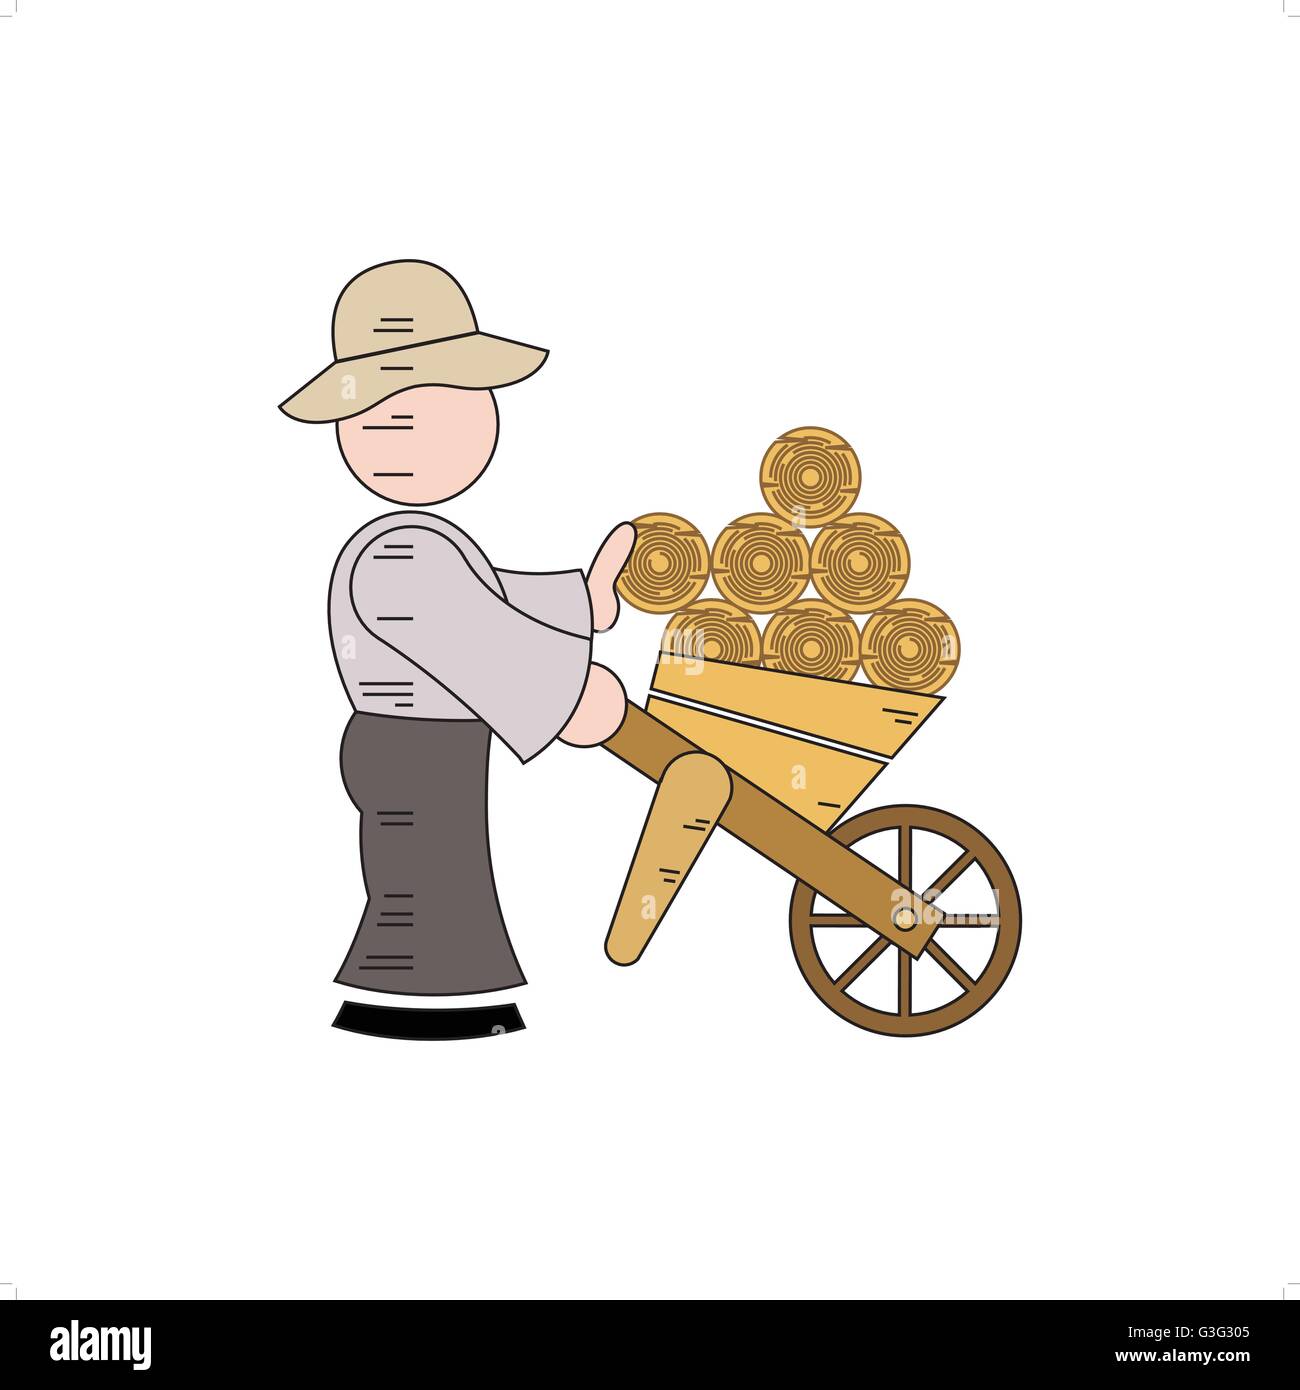 Cartoon character of a woodcutter carrying logs vector illustration isolated on white background. Stock Vector